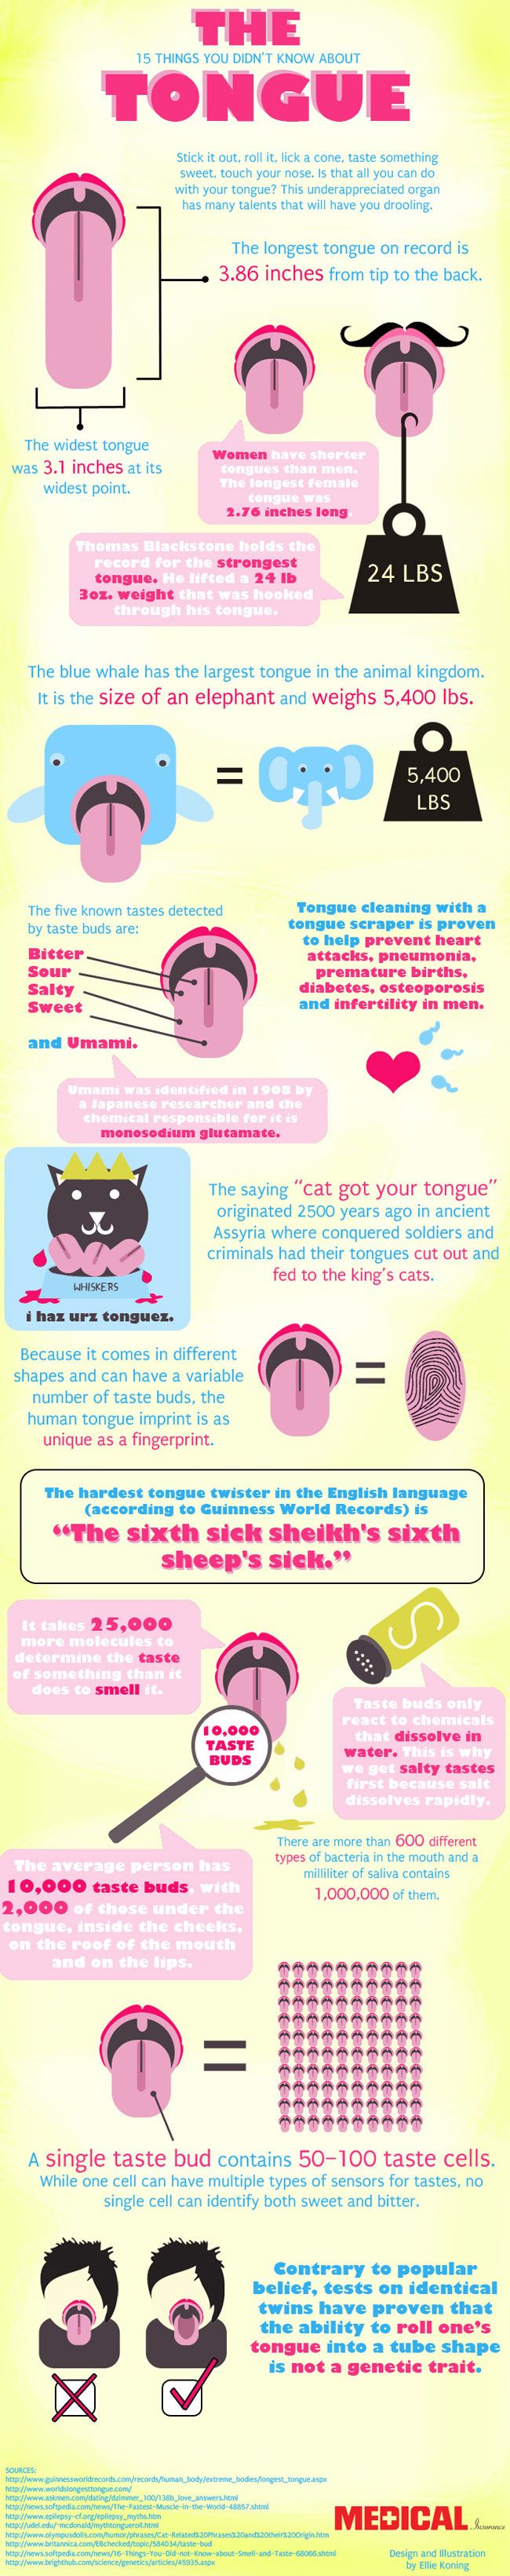 tonguefacts1